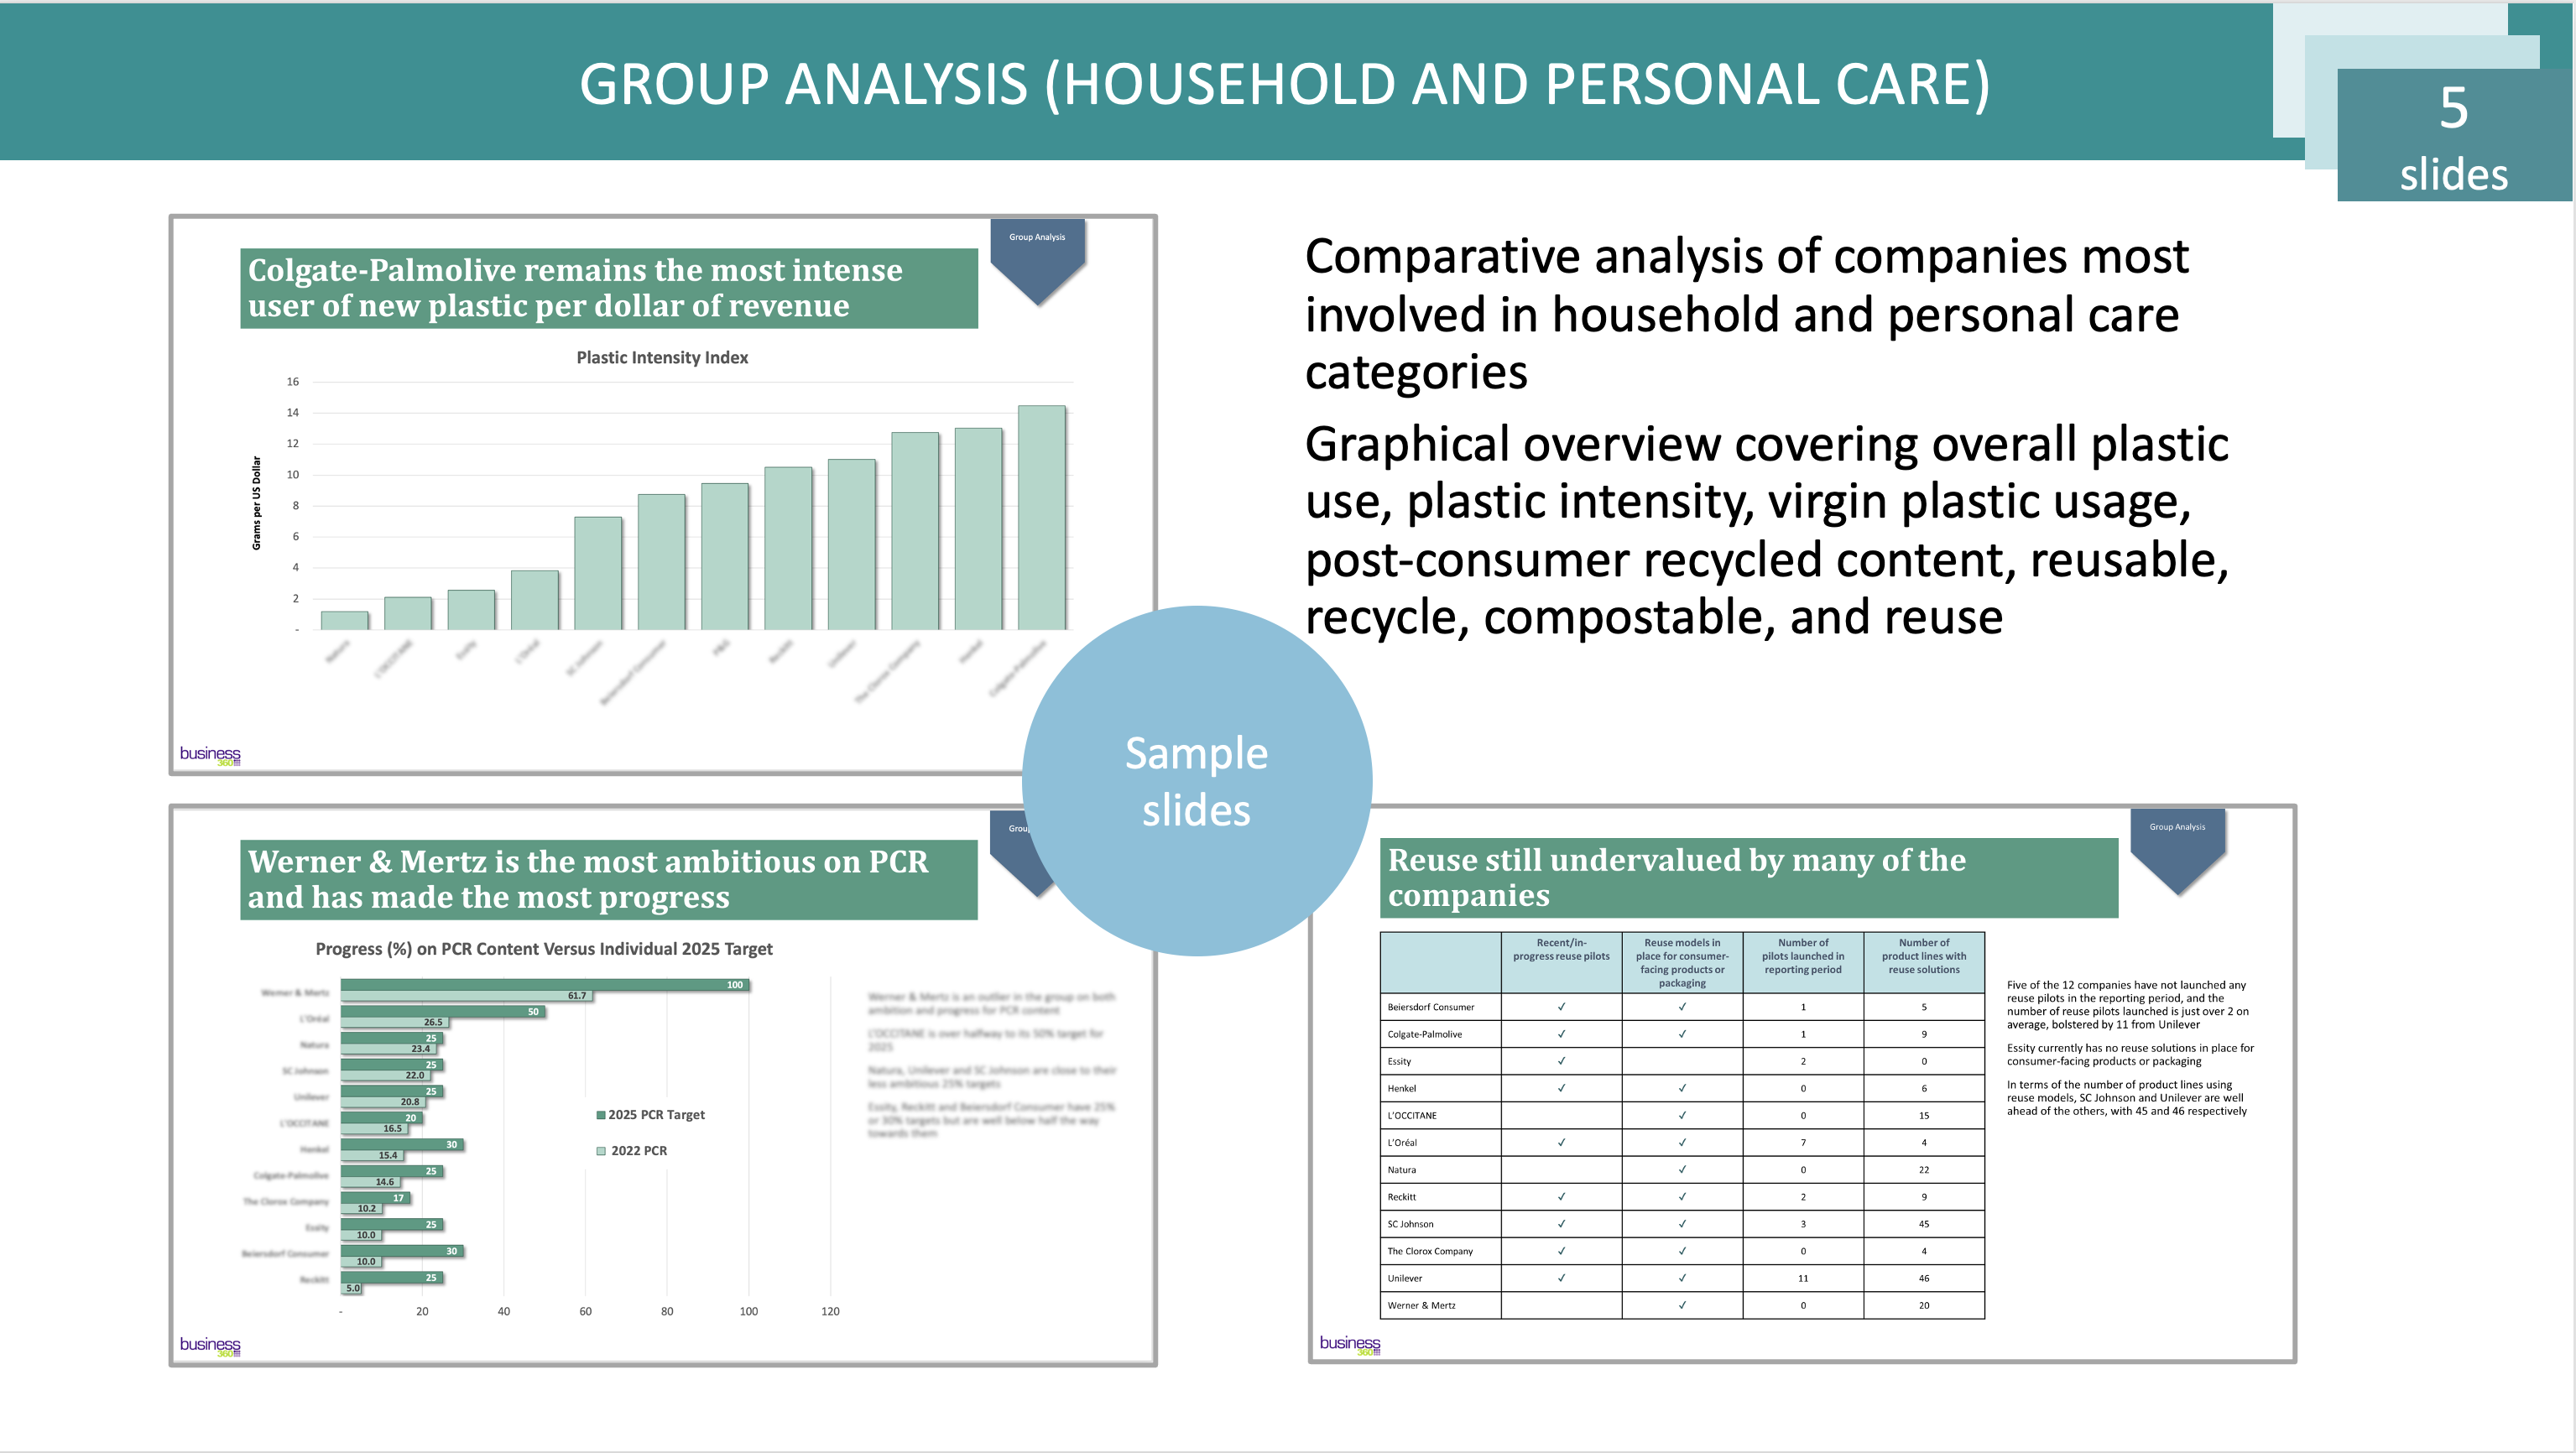 GROUP ANALYSIS (HOUSEHOLD AND PERSONAL CARE)